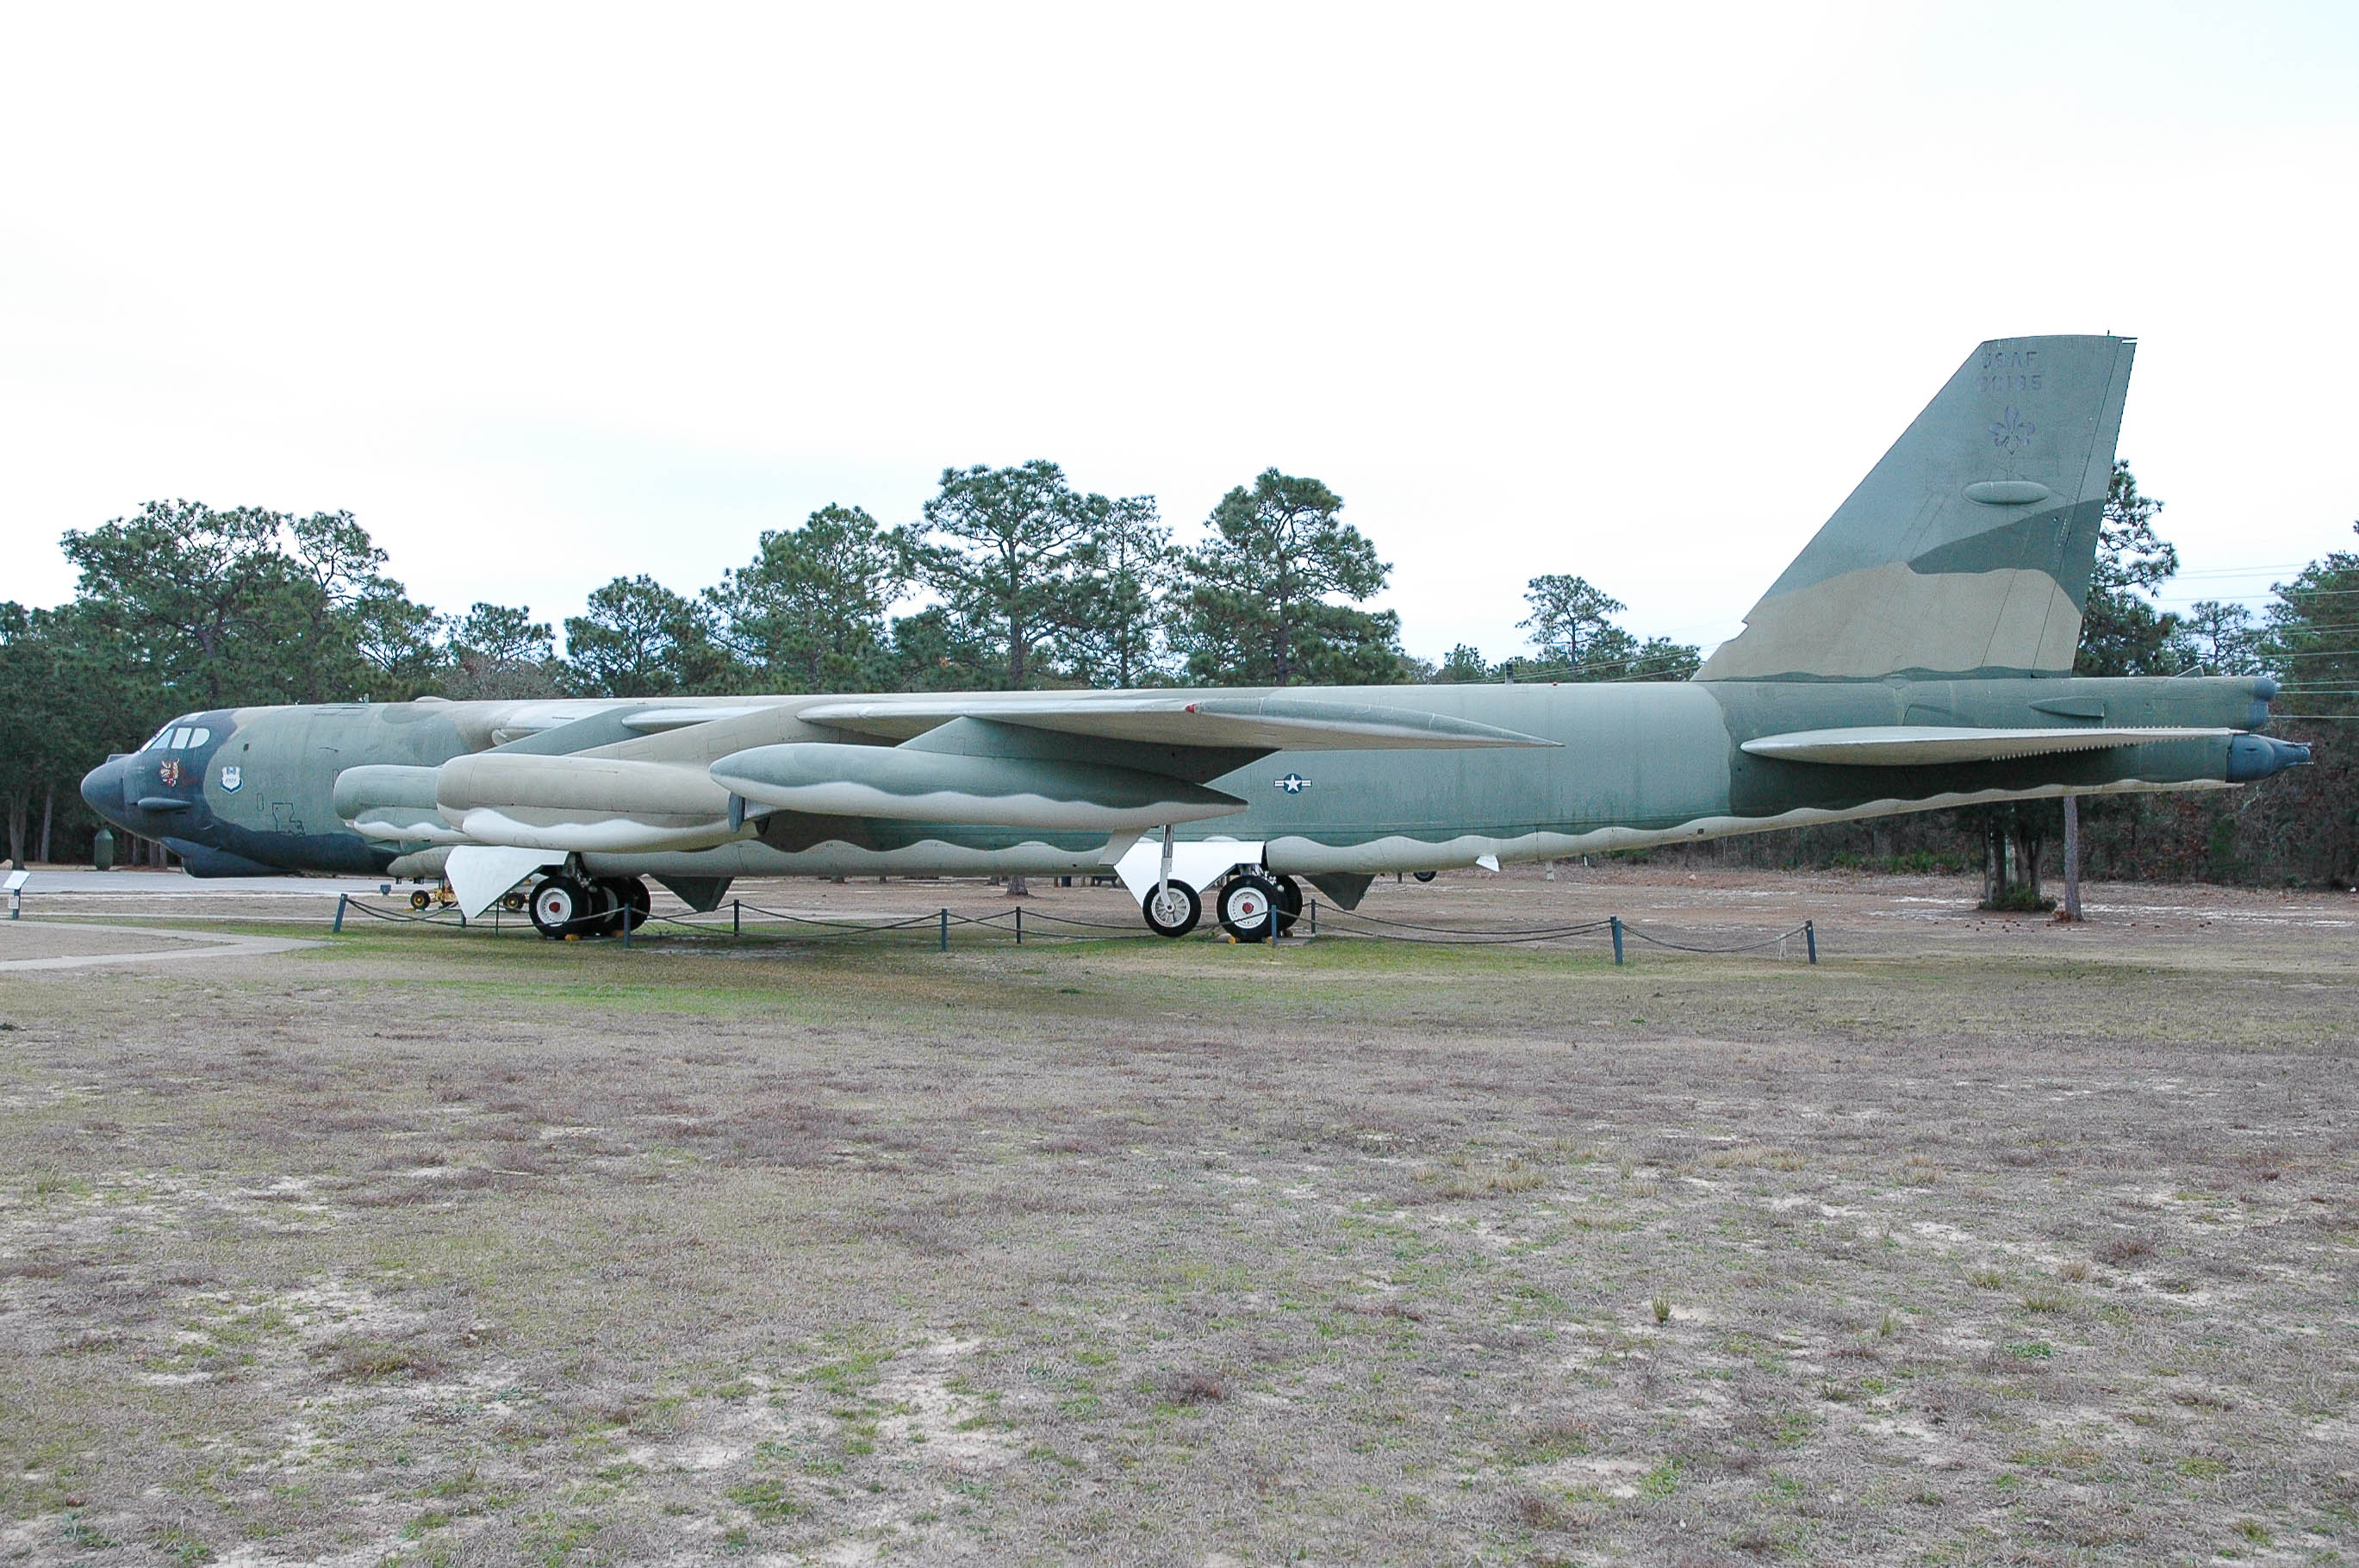 58-0185/580185 Preserved Boeing B-52G Stratofortress Photo by colinw - AVSpotters.com